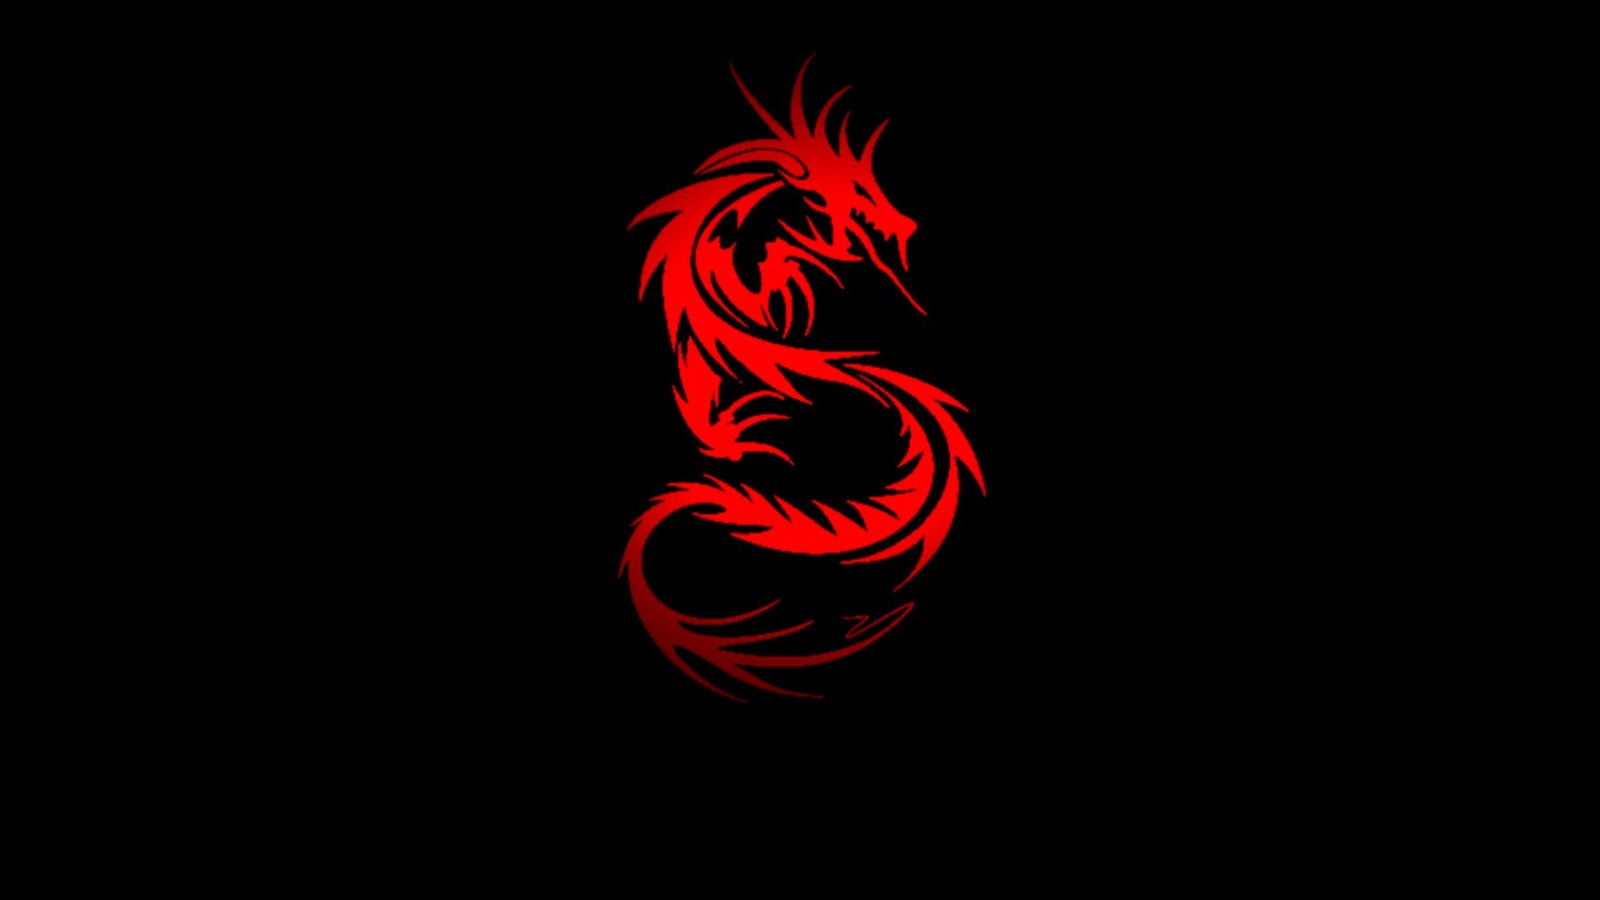 Red Dragon Image Amp Pictures Becuo